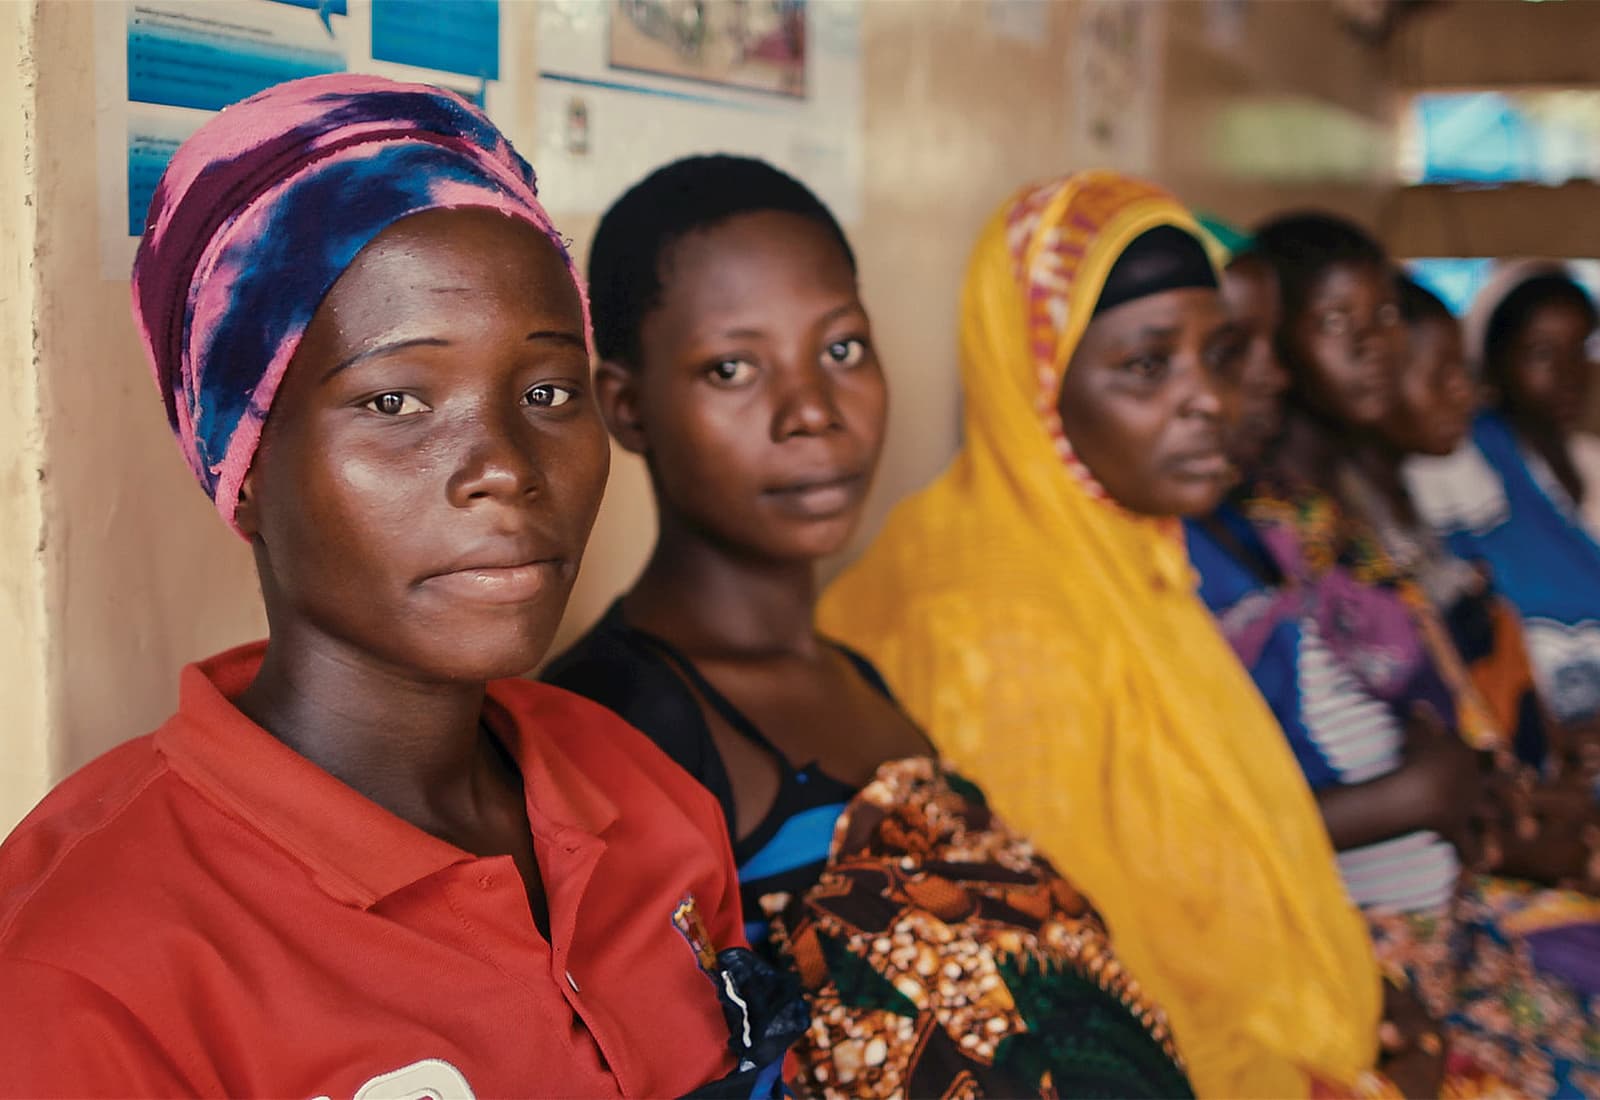 "Women in a Bloomberg Philanthropies supported health center’s maternity ward in Tanzania. "